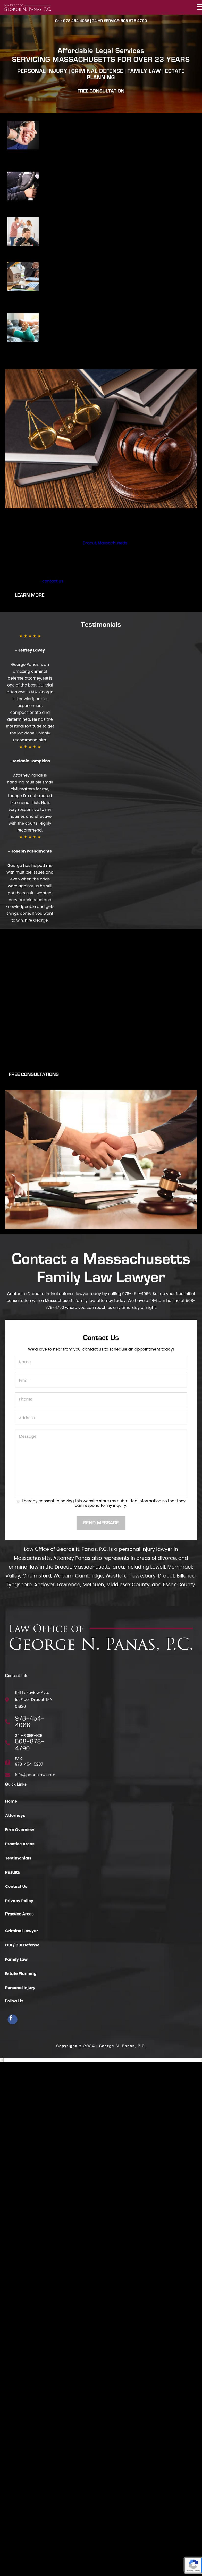 Panas, Attorney at Law - Dracut MA Lawyers